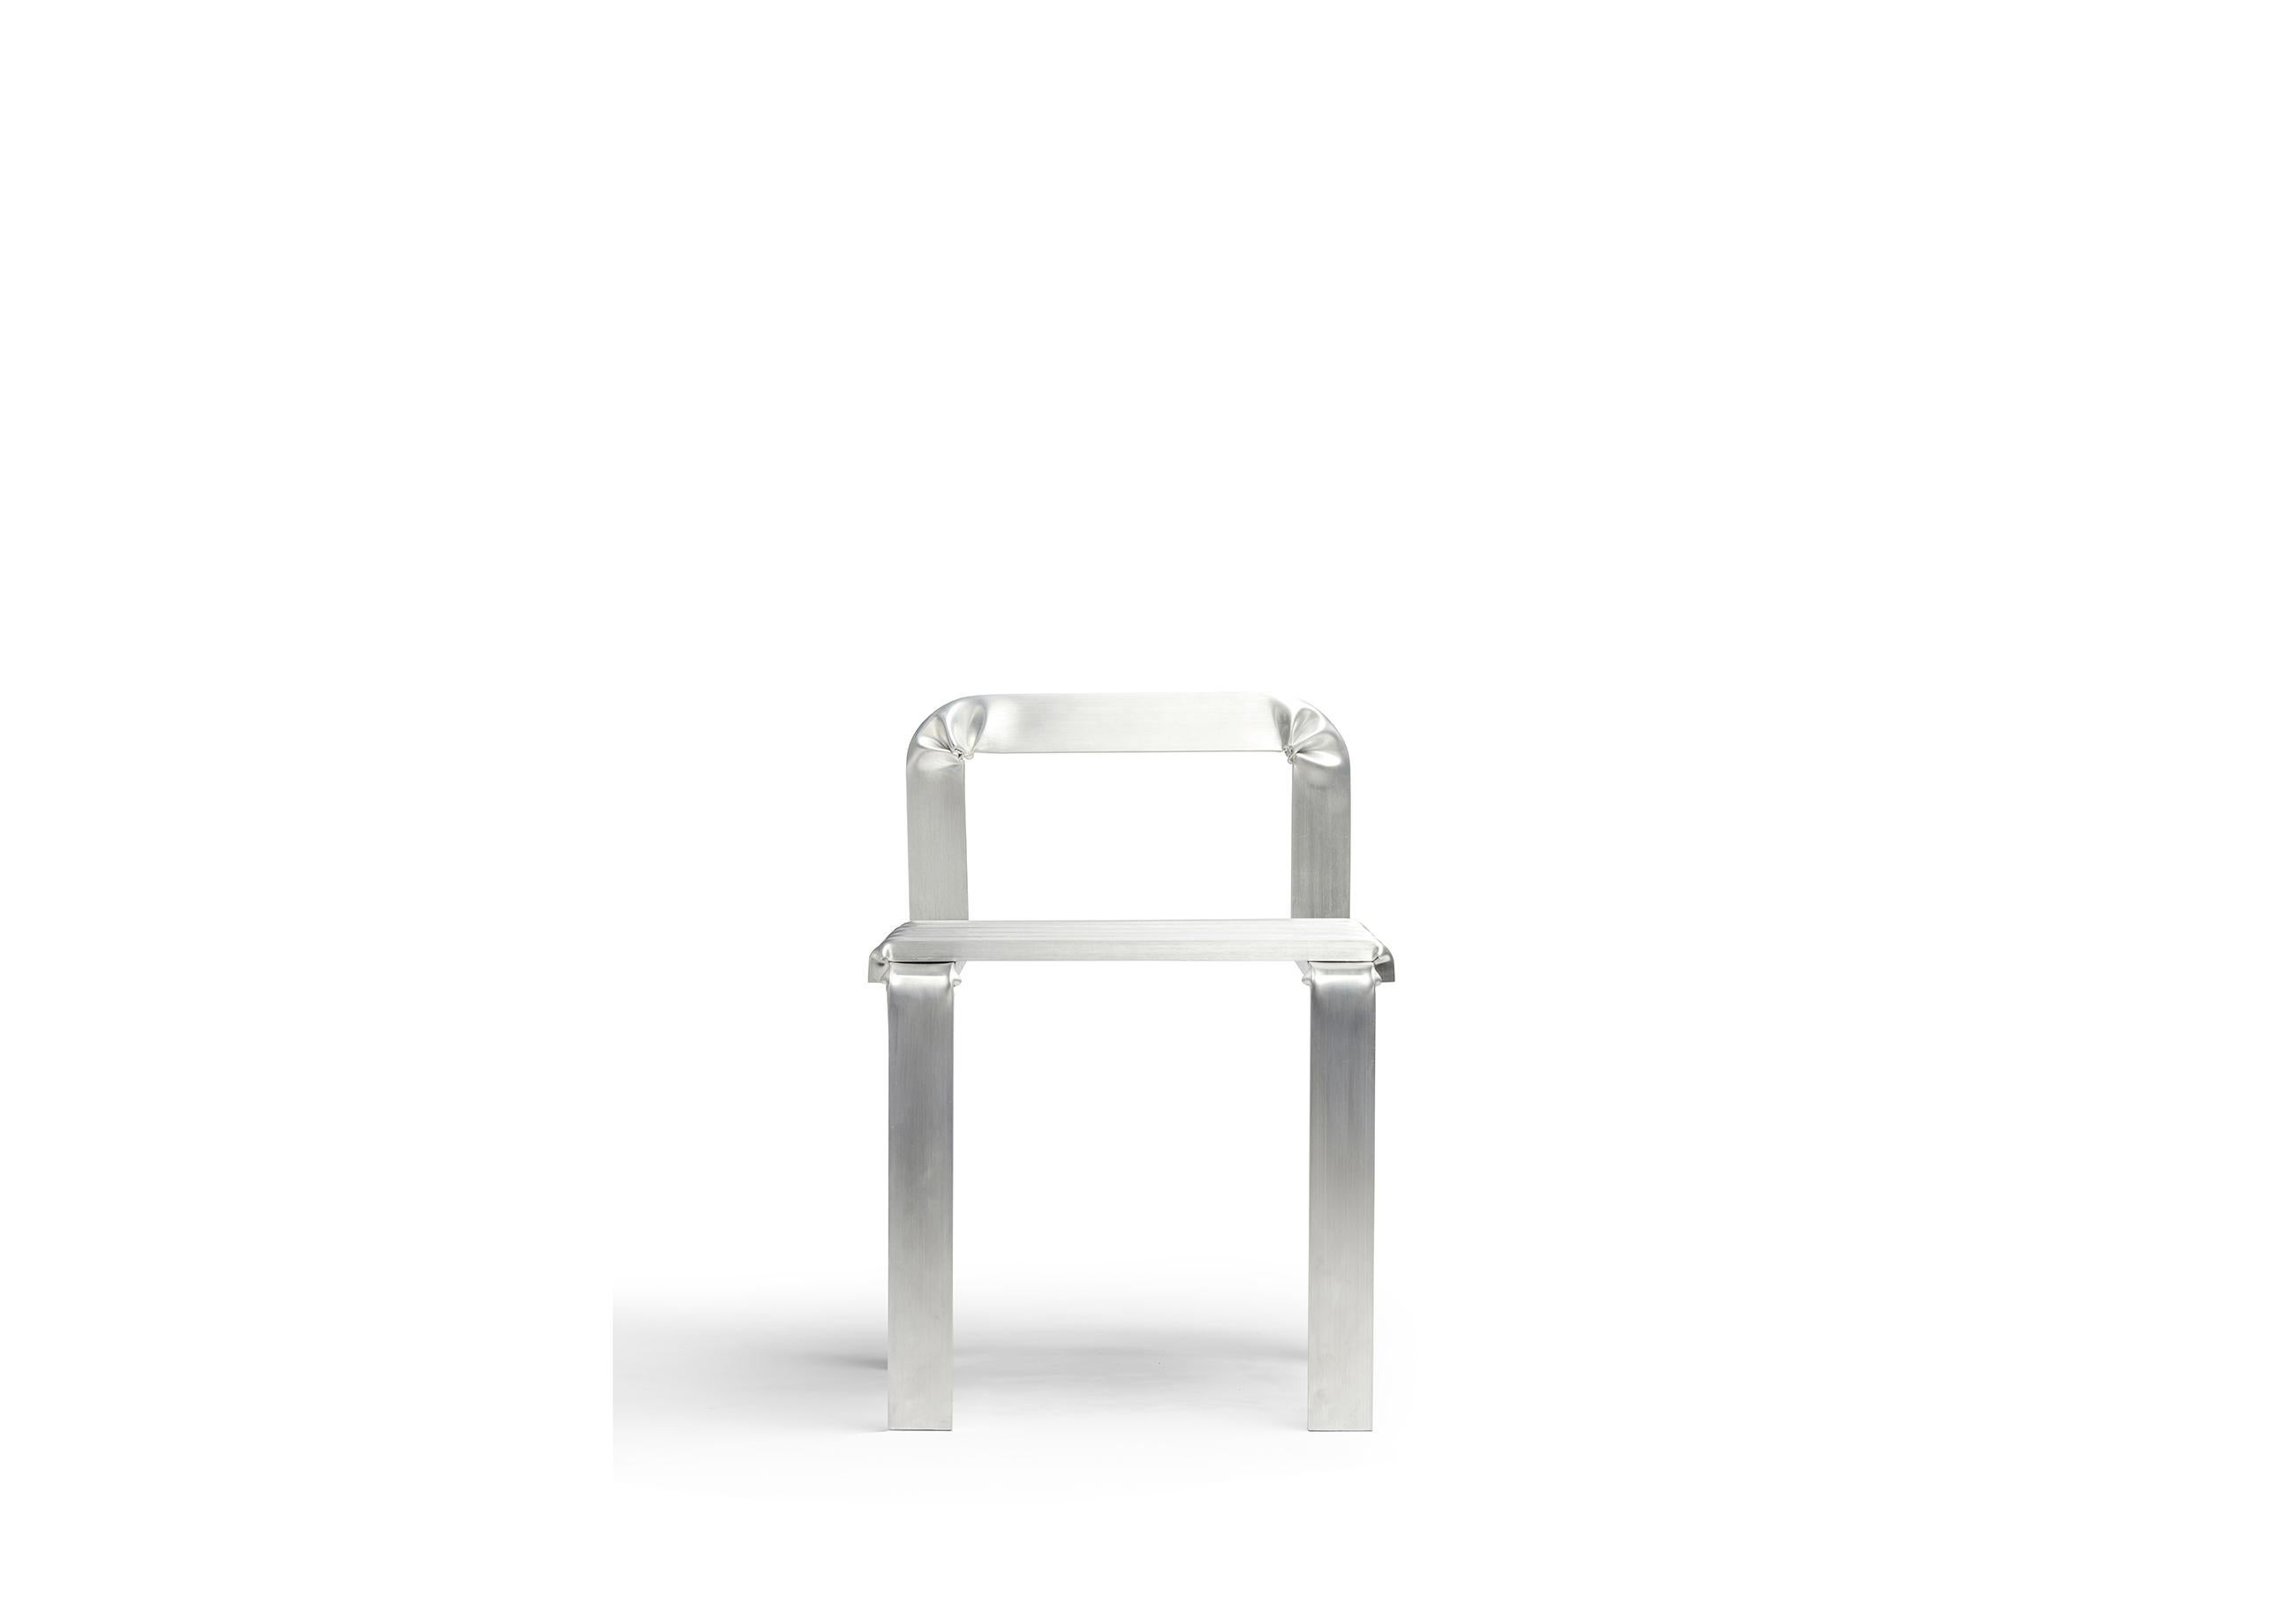 This wide chair with a low backrest is conceived as a path of folded aluminum box-pipe. Corners are deformed manually in a demonstration of material plasticity. 

The concept for the Unstressed chair moves from the exploration of metal plasticity